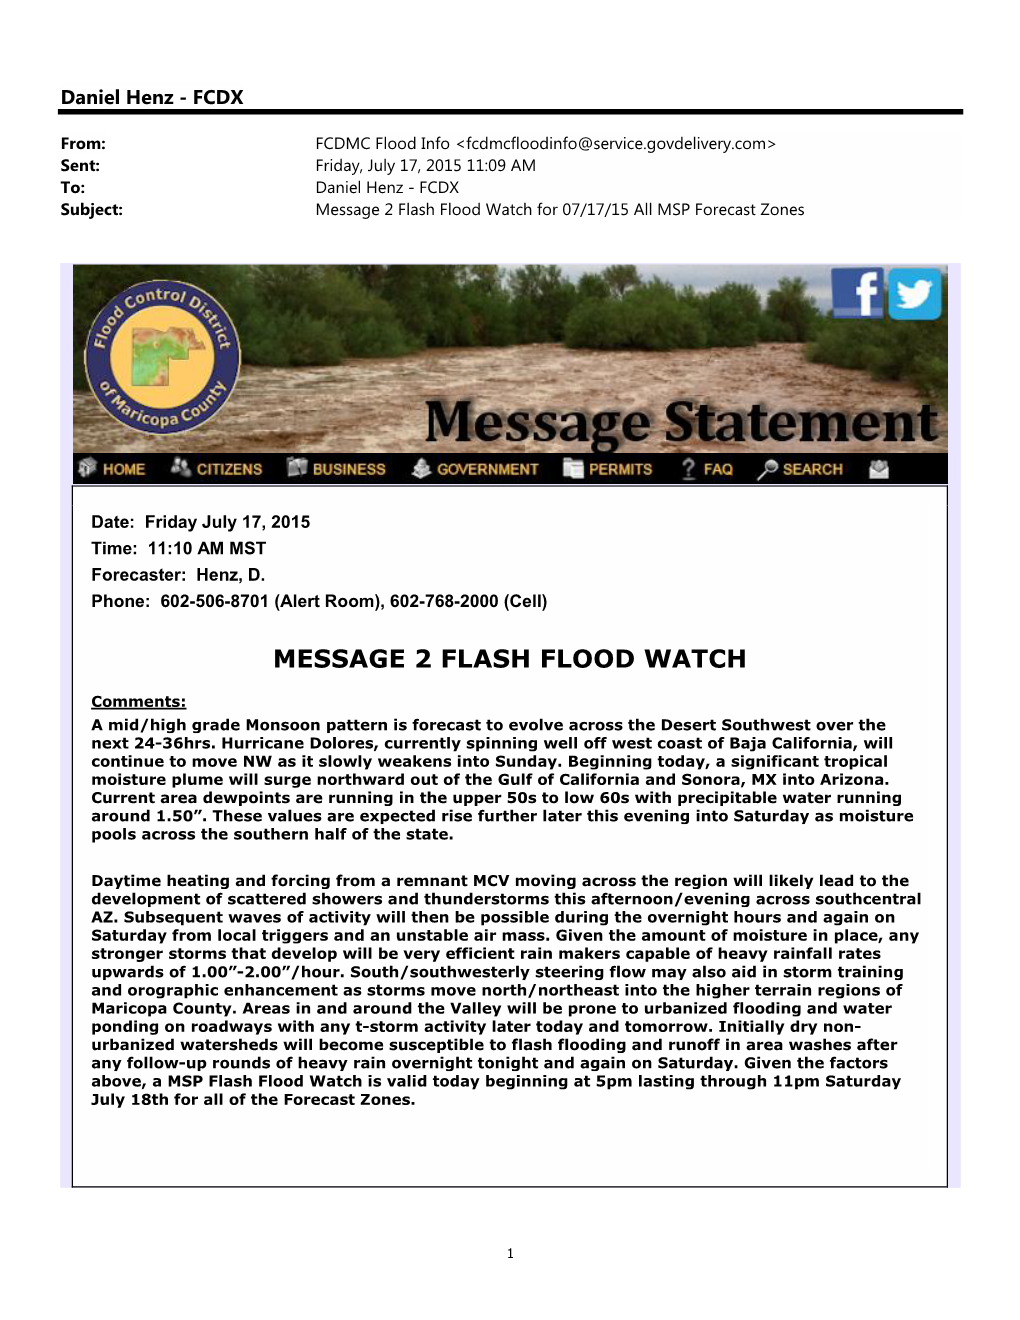 Message 2 Flash Flood Watch for 07/17/15 All MSP Forecast Zones